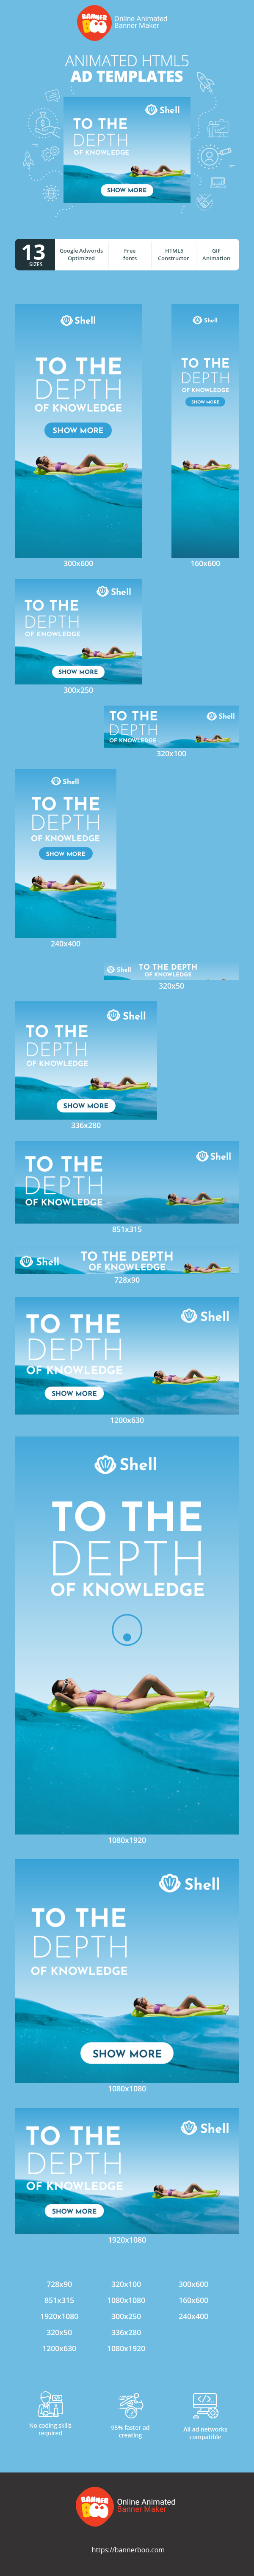 To The Depth Of Knowledge — Online Learning Platform